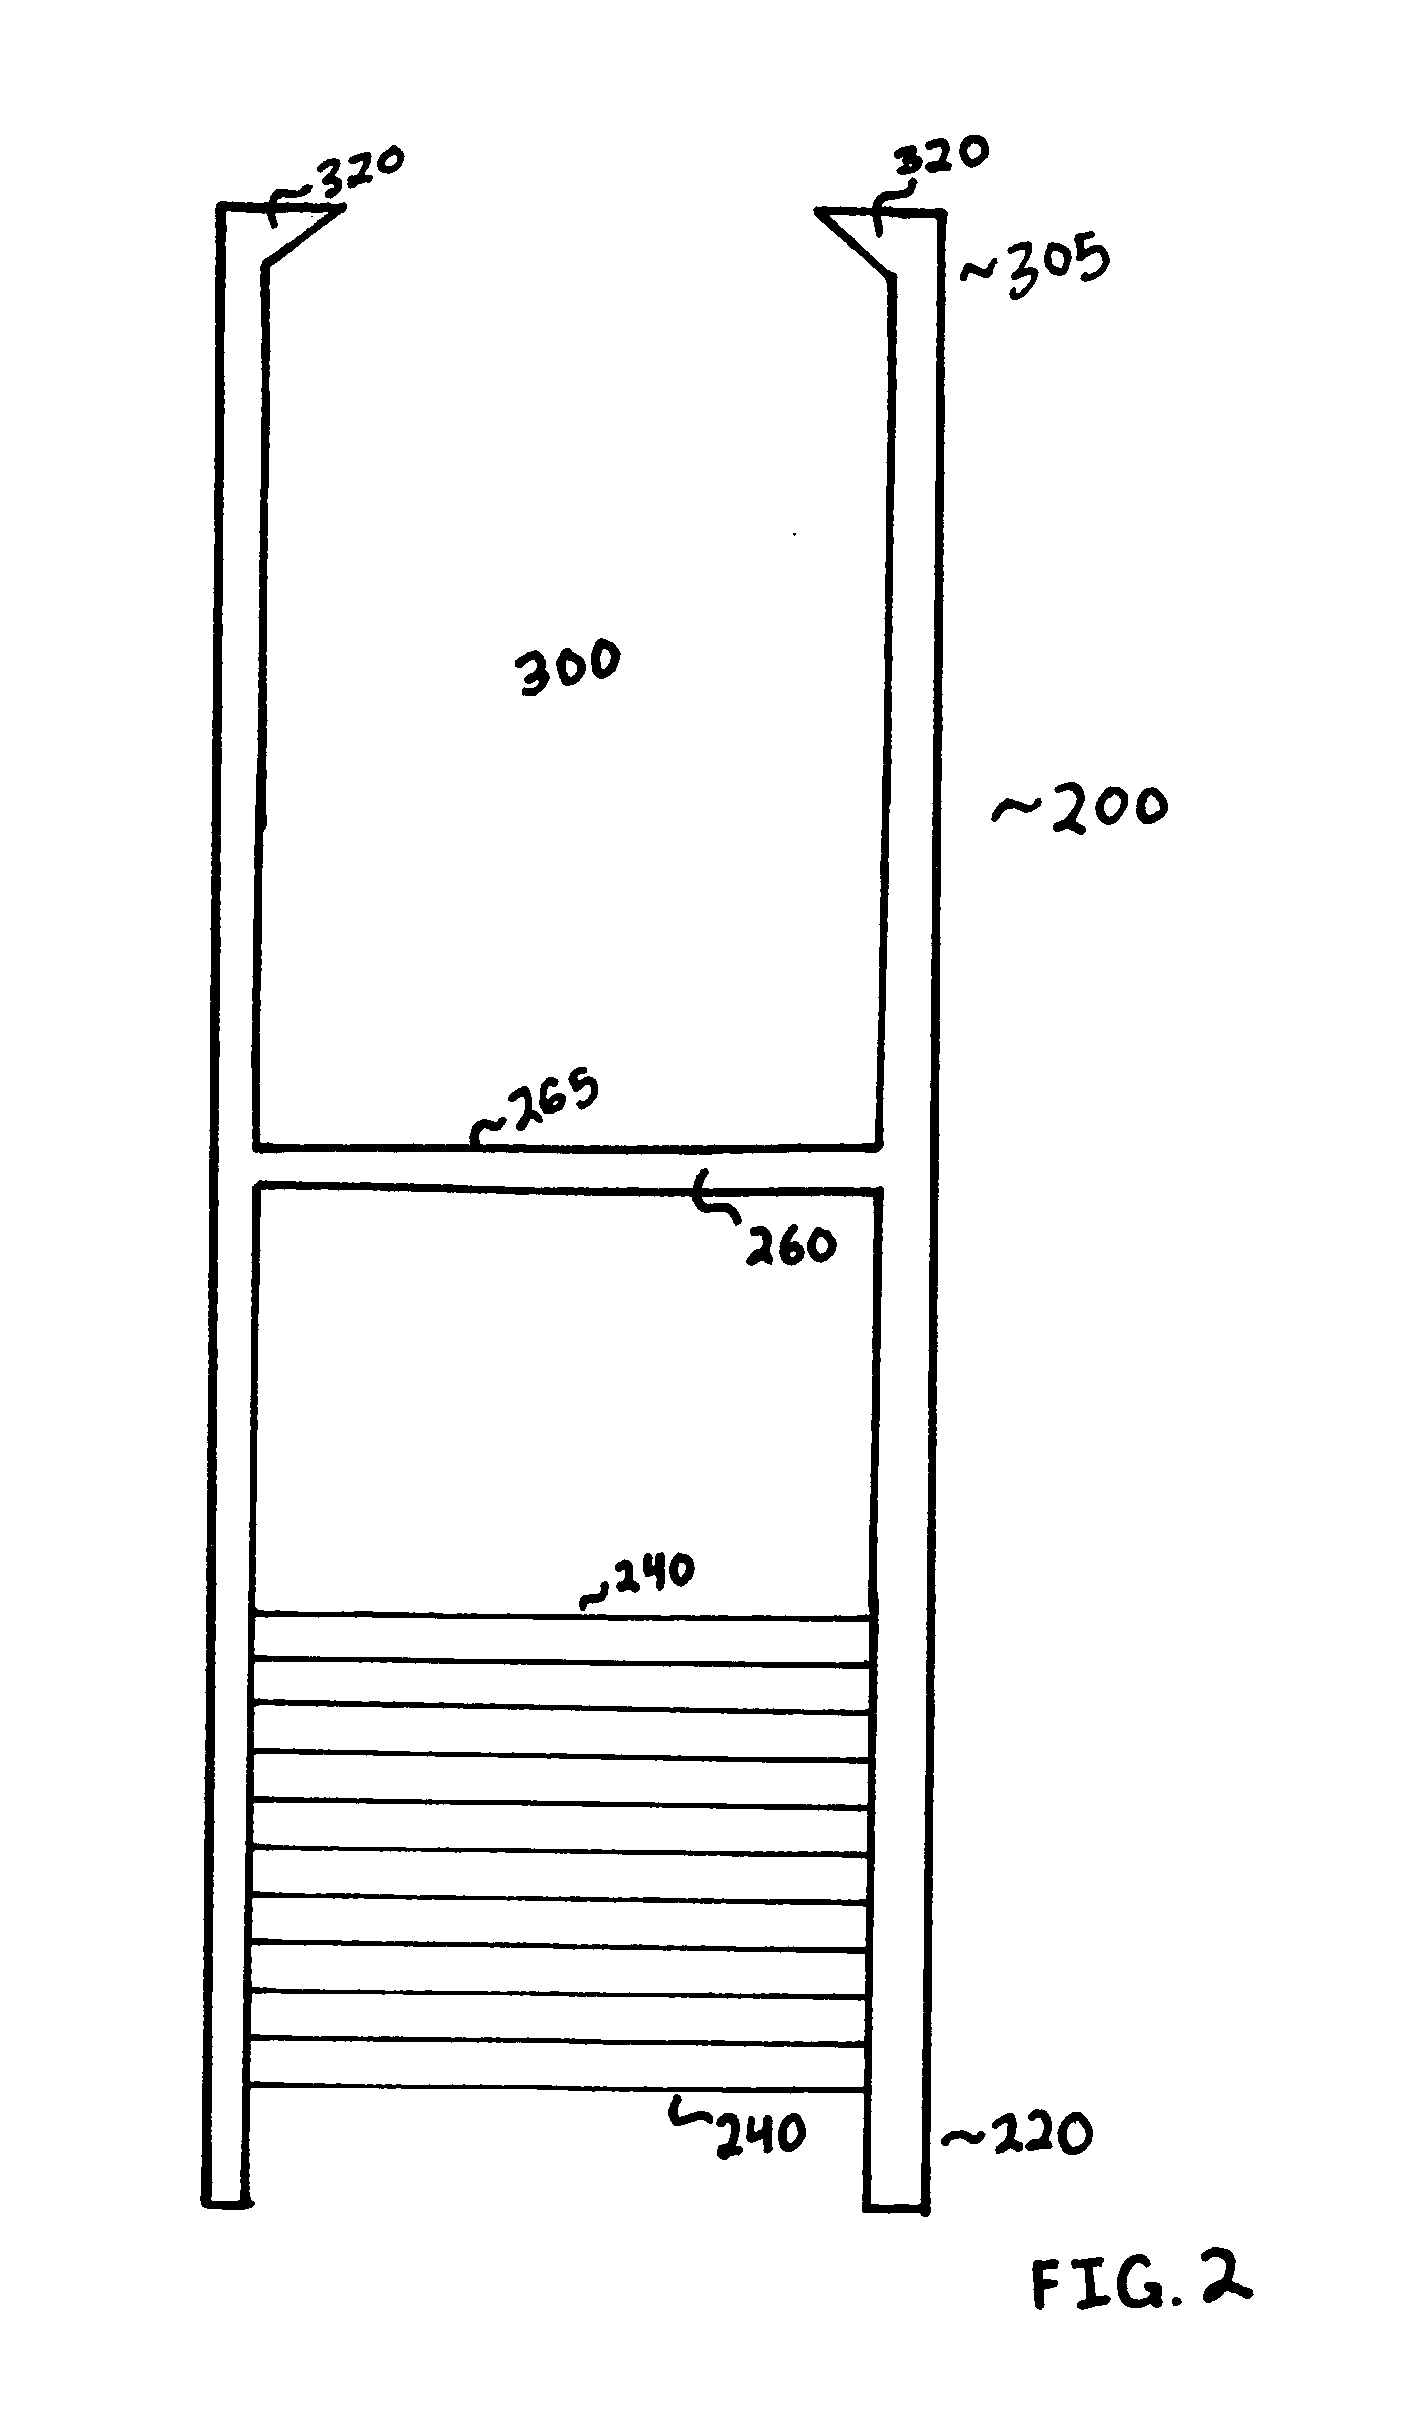 Small bowl filtered smoking apparatus and method for using same